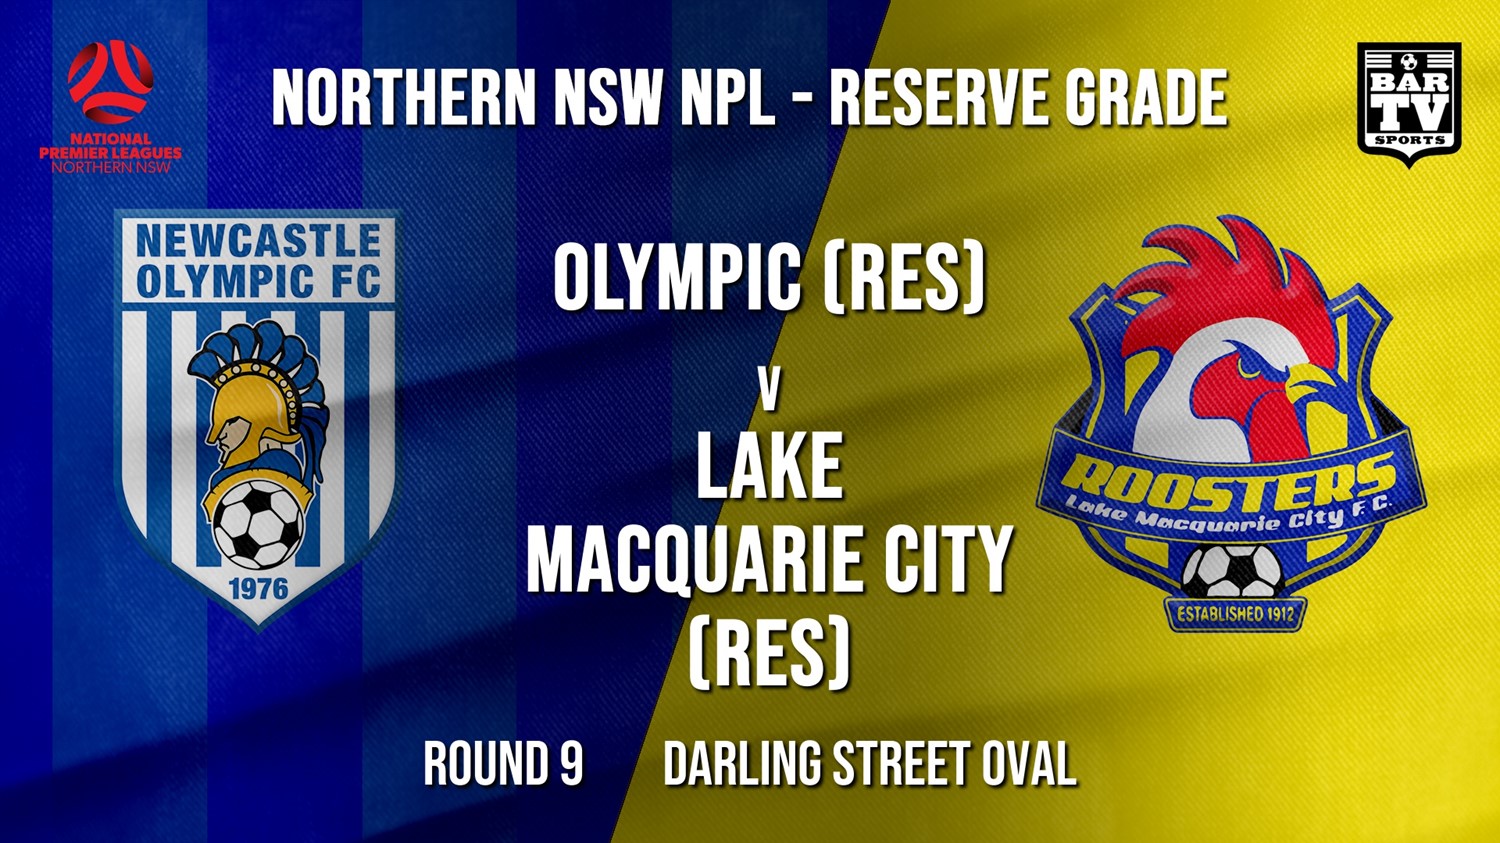 NPL NNSW RES Round 9 - Newcastle Olympic (Res) v Lake Macquarie City FC (Res) Minigame Slate Image